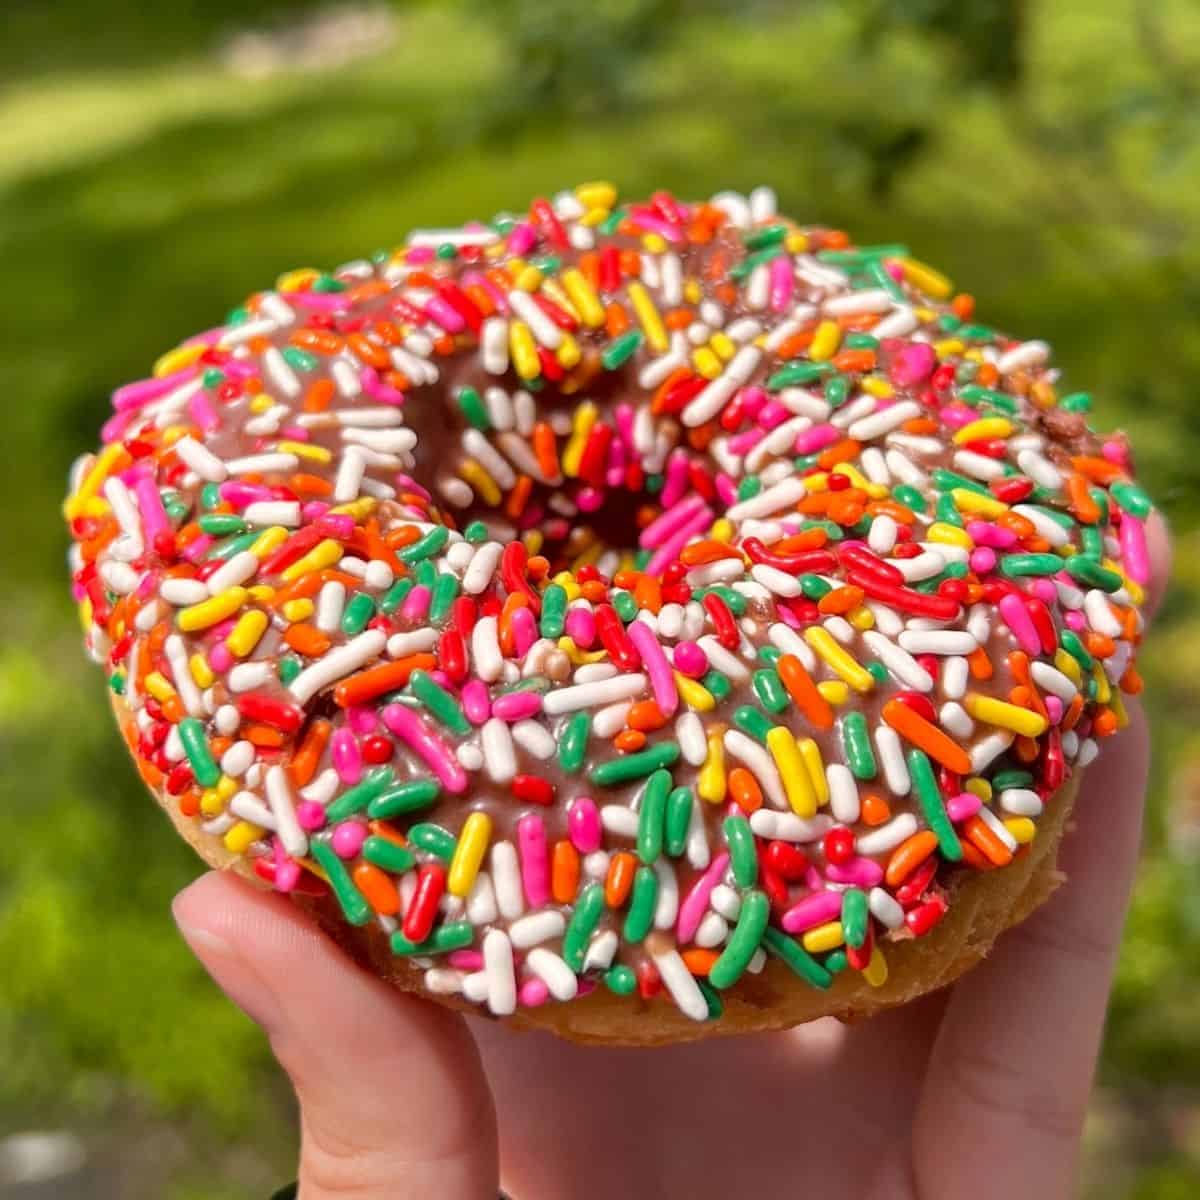 sprinkled donut with chocolate frosting from Dixie Donuts.